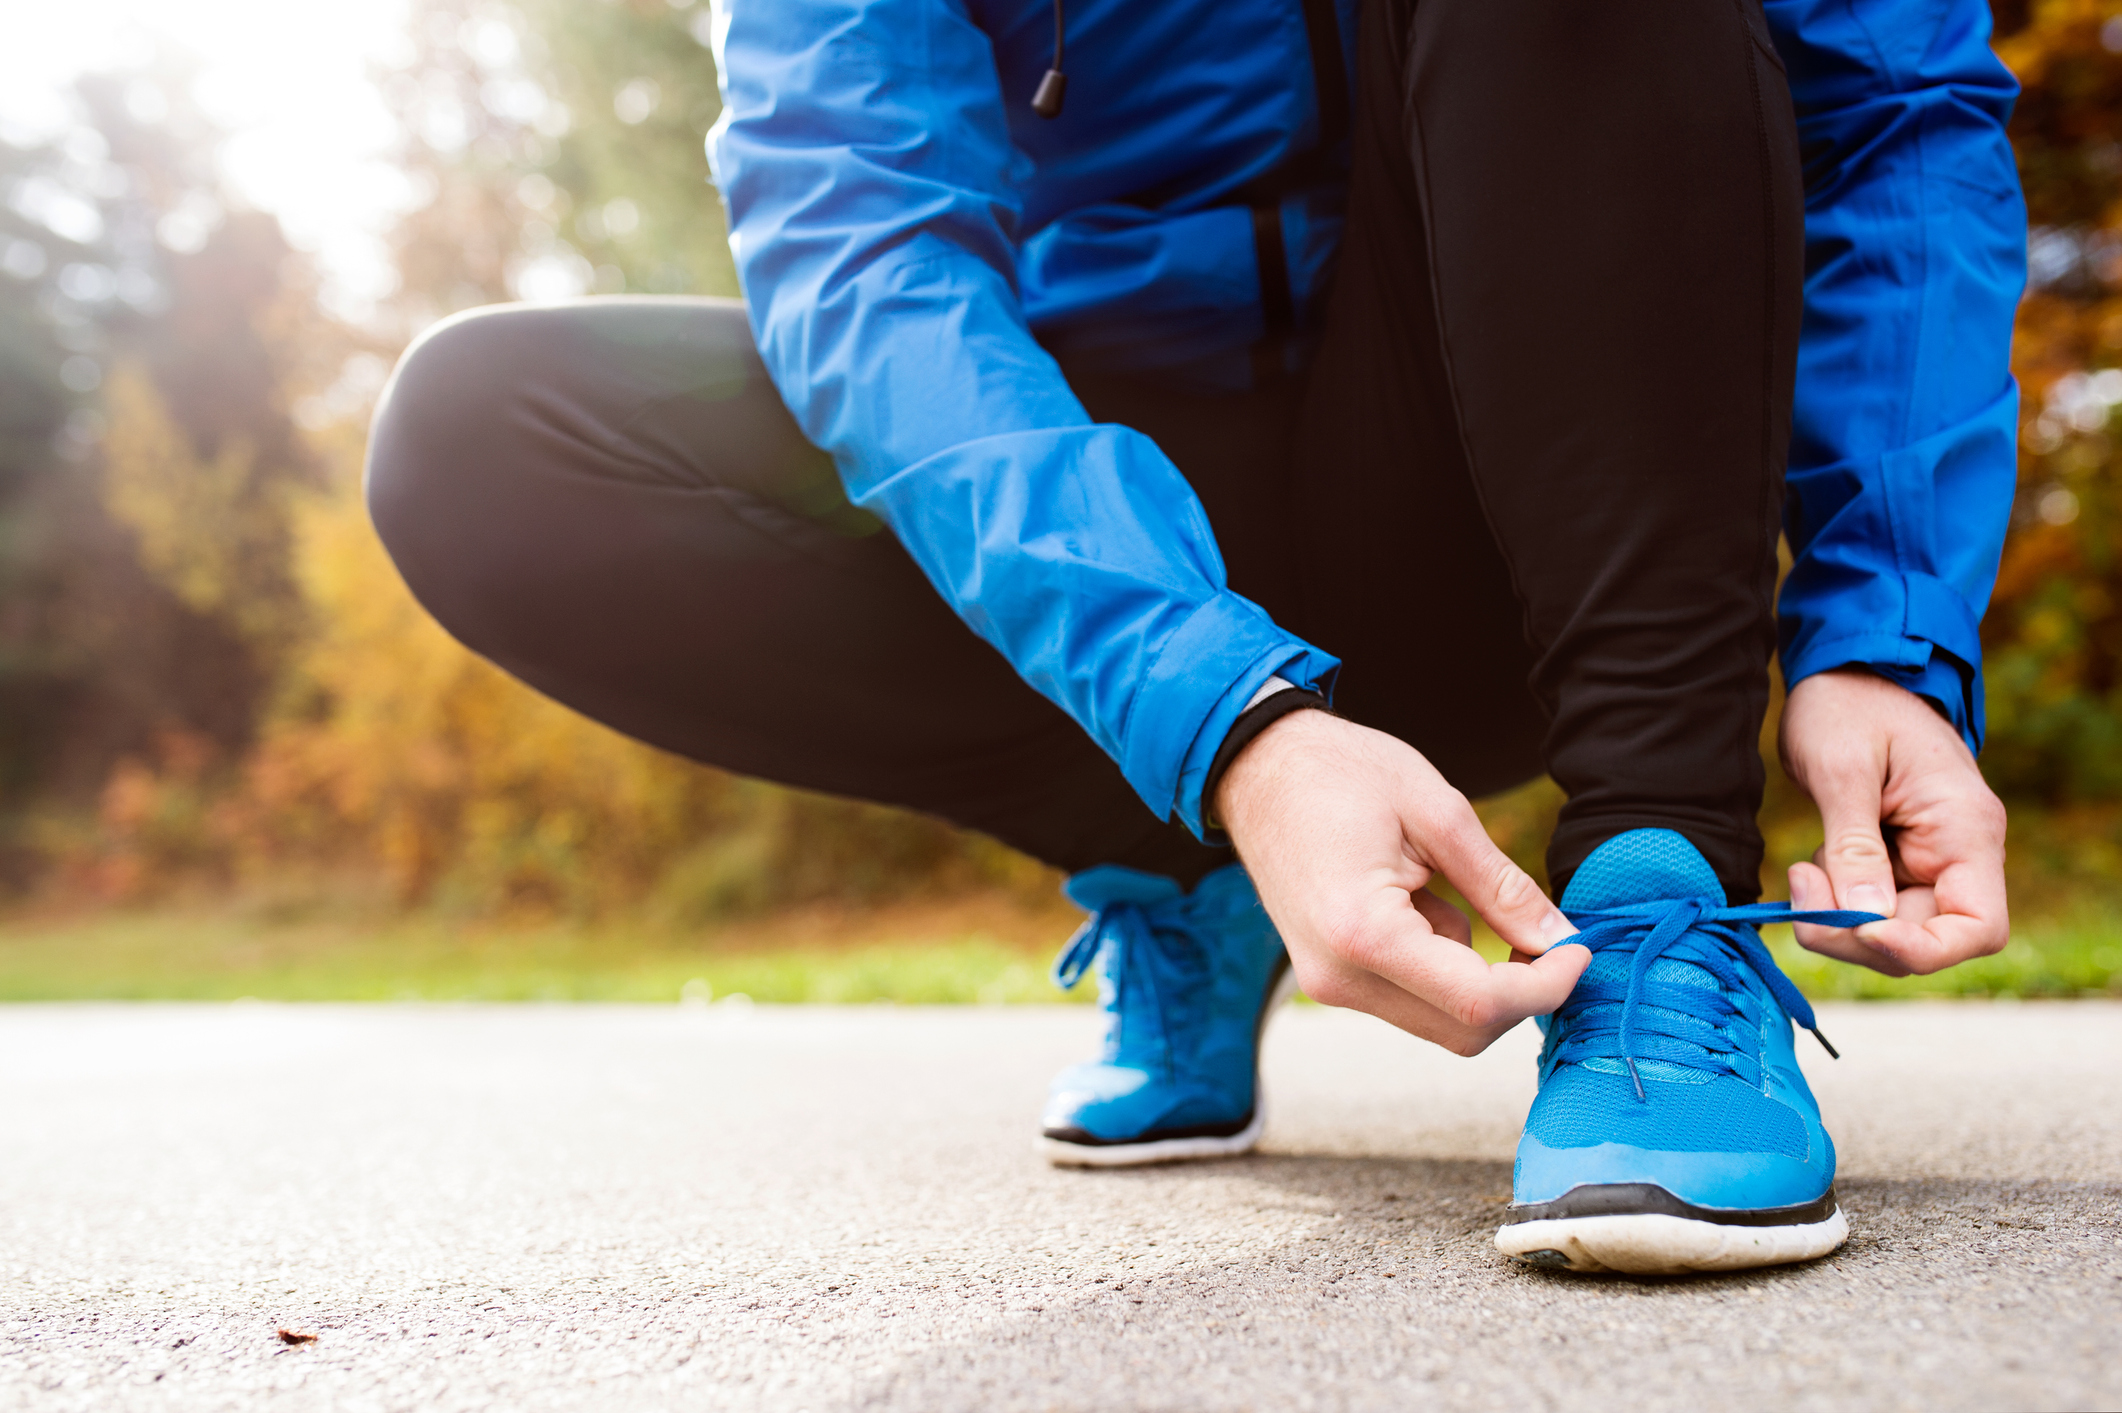 Runner in blue jacket outside in colorful sunny autumn nature, tying shoelaces. (Photo: iStock - Halfpoint)